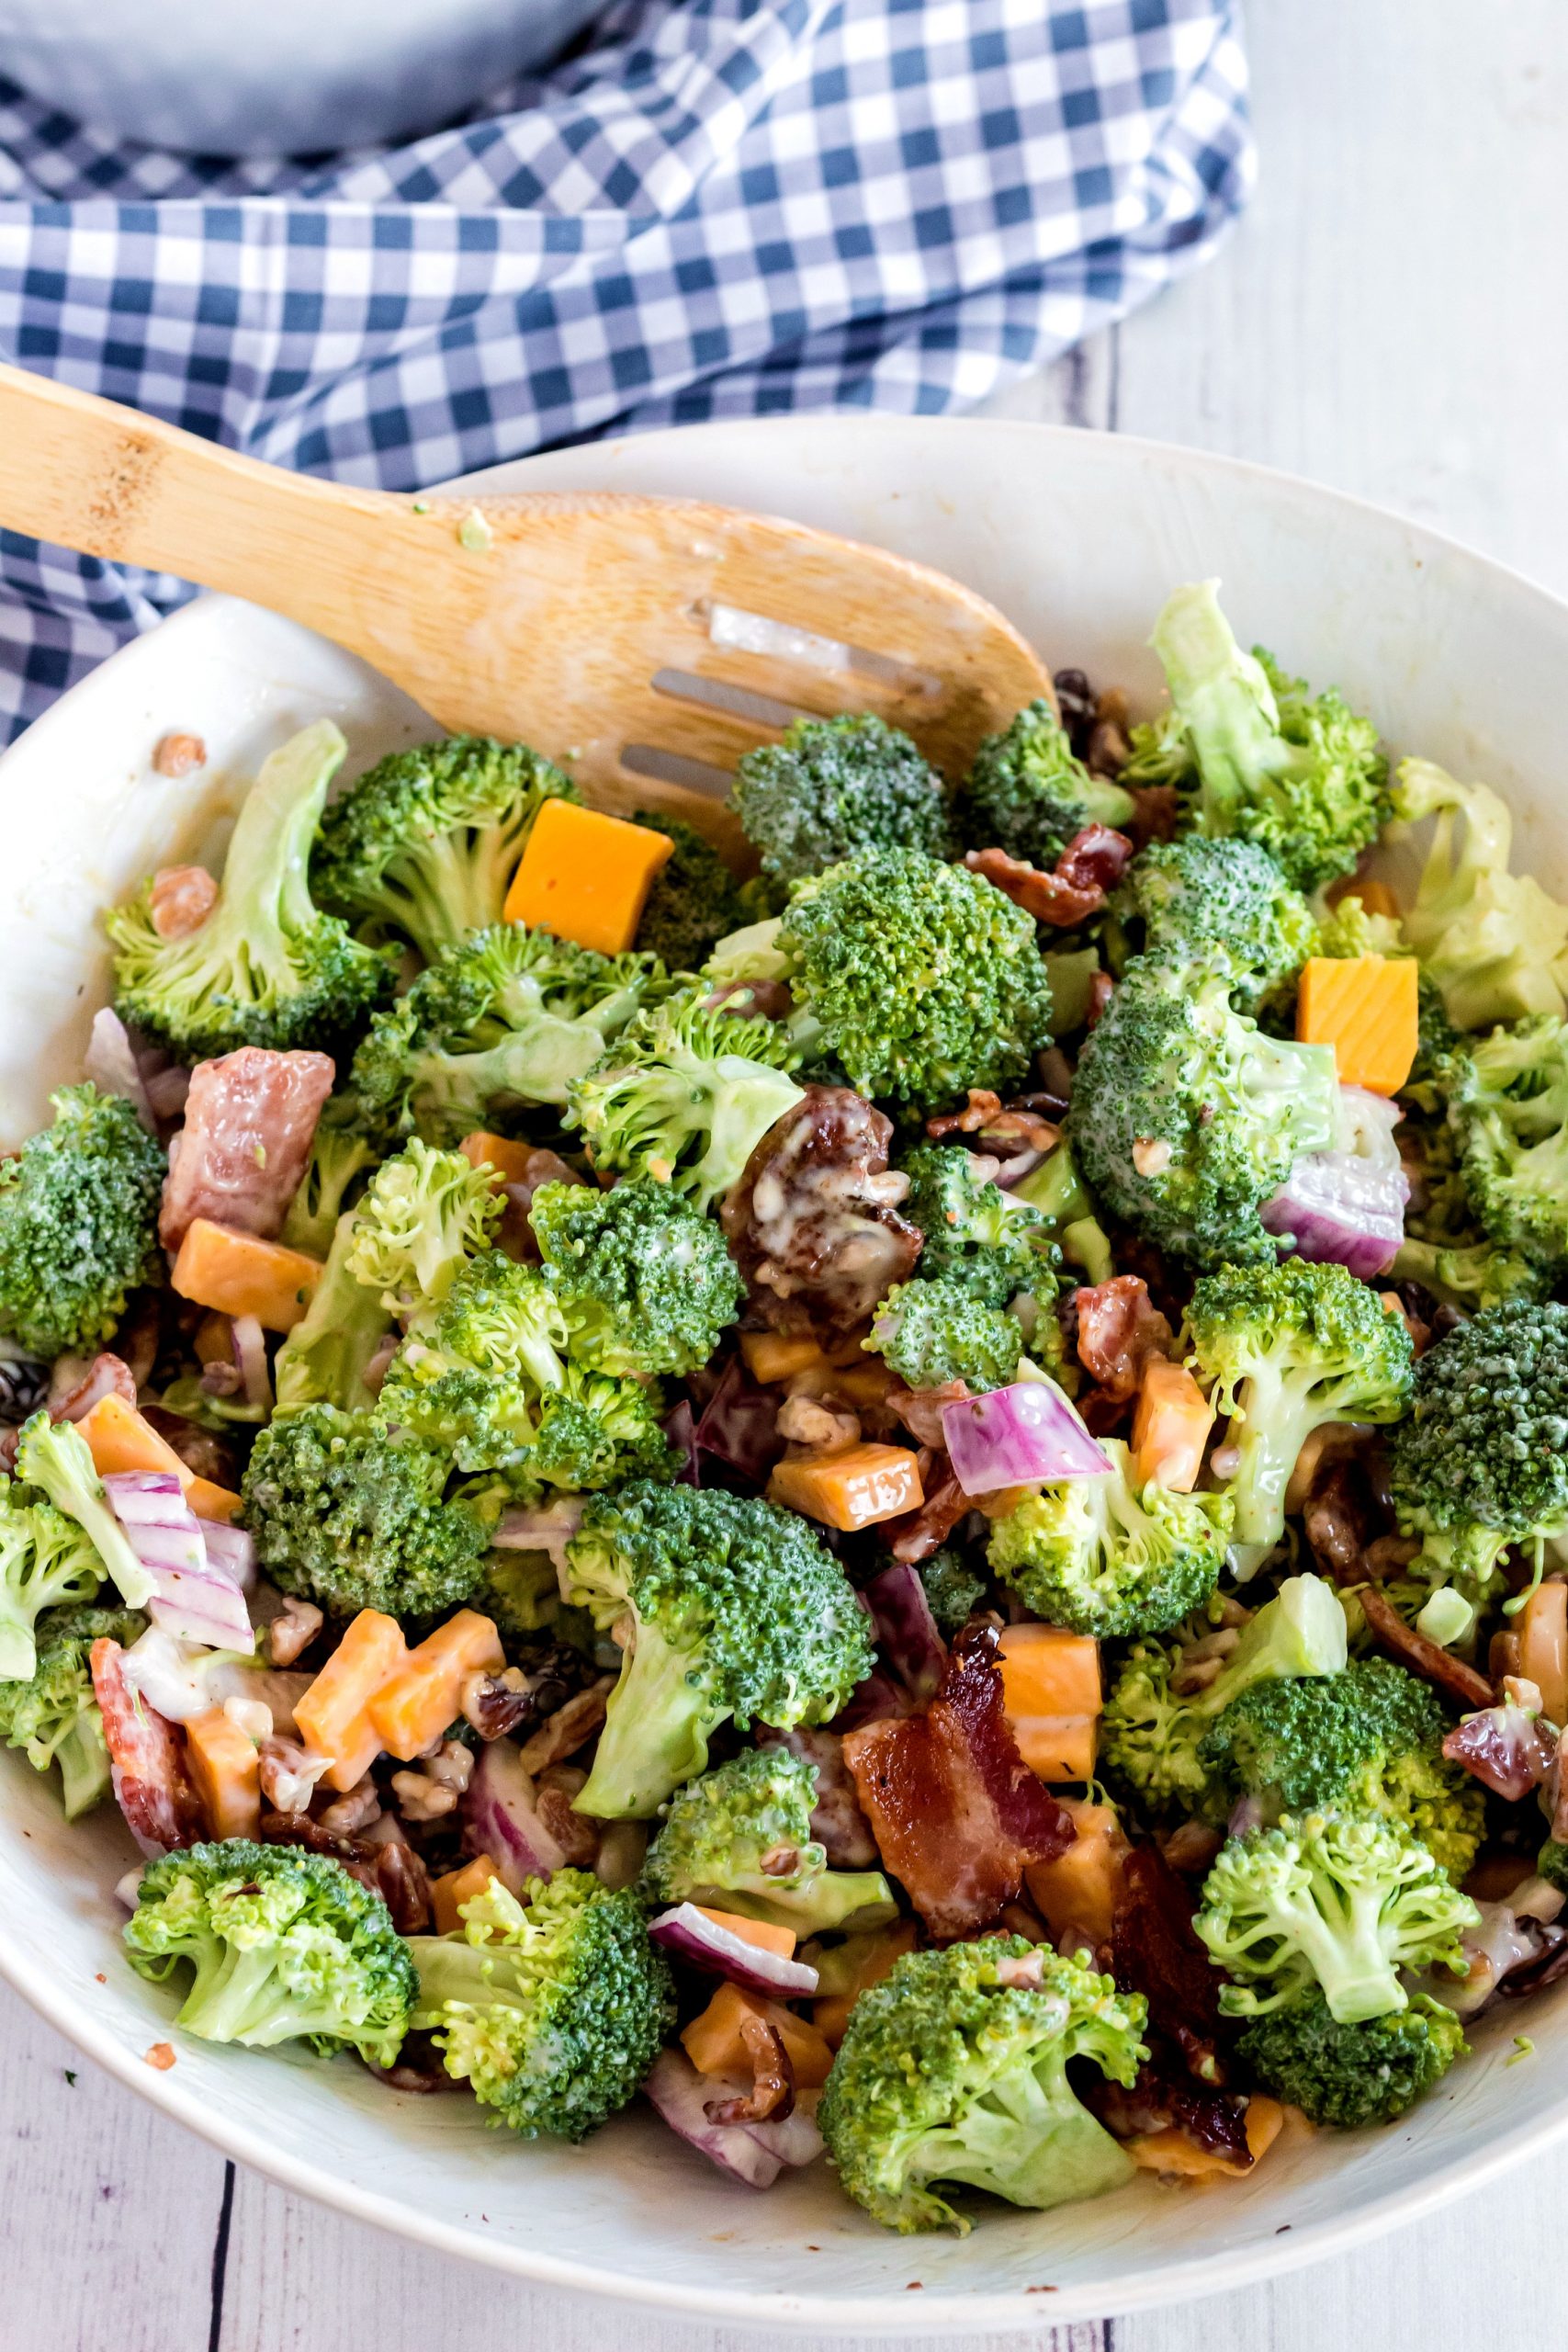 Broccoli with loads of extra toppings tossed into a salad